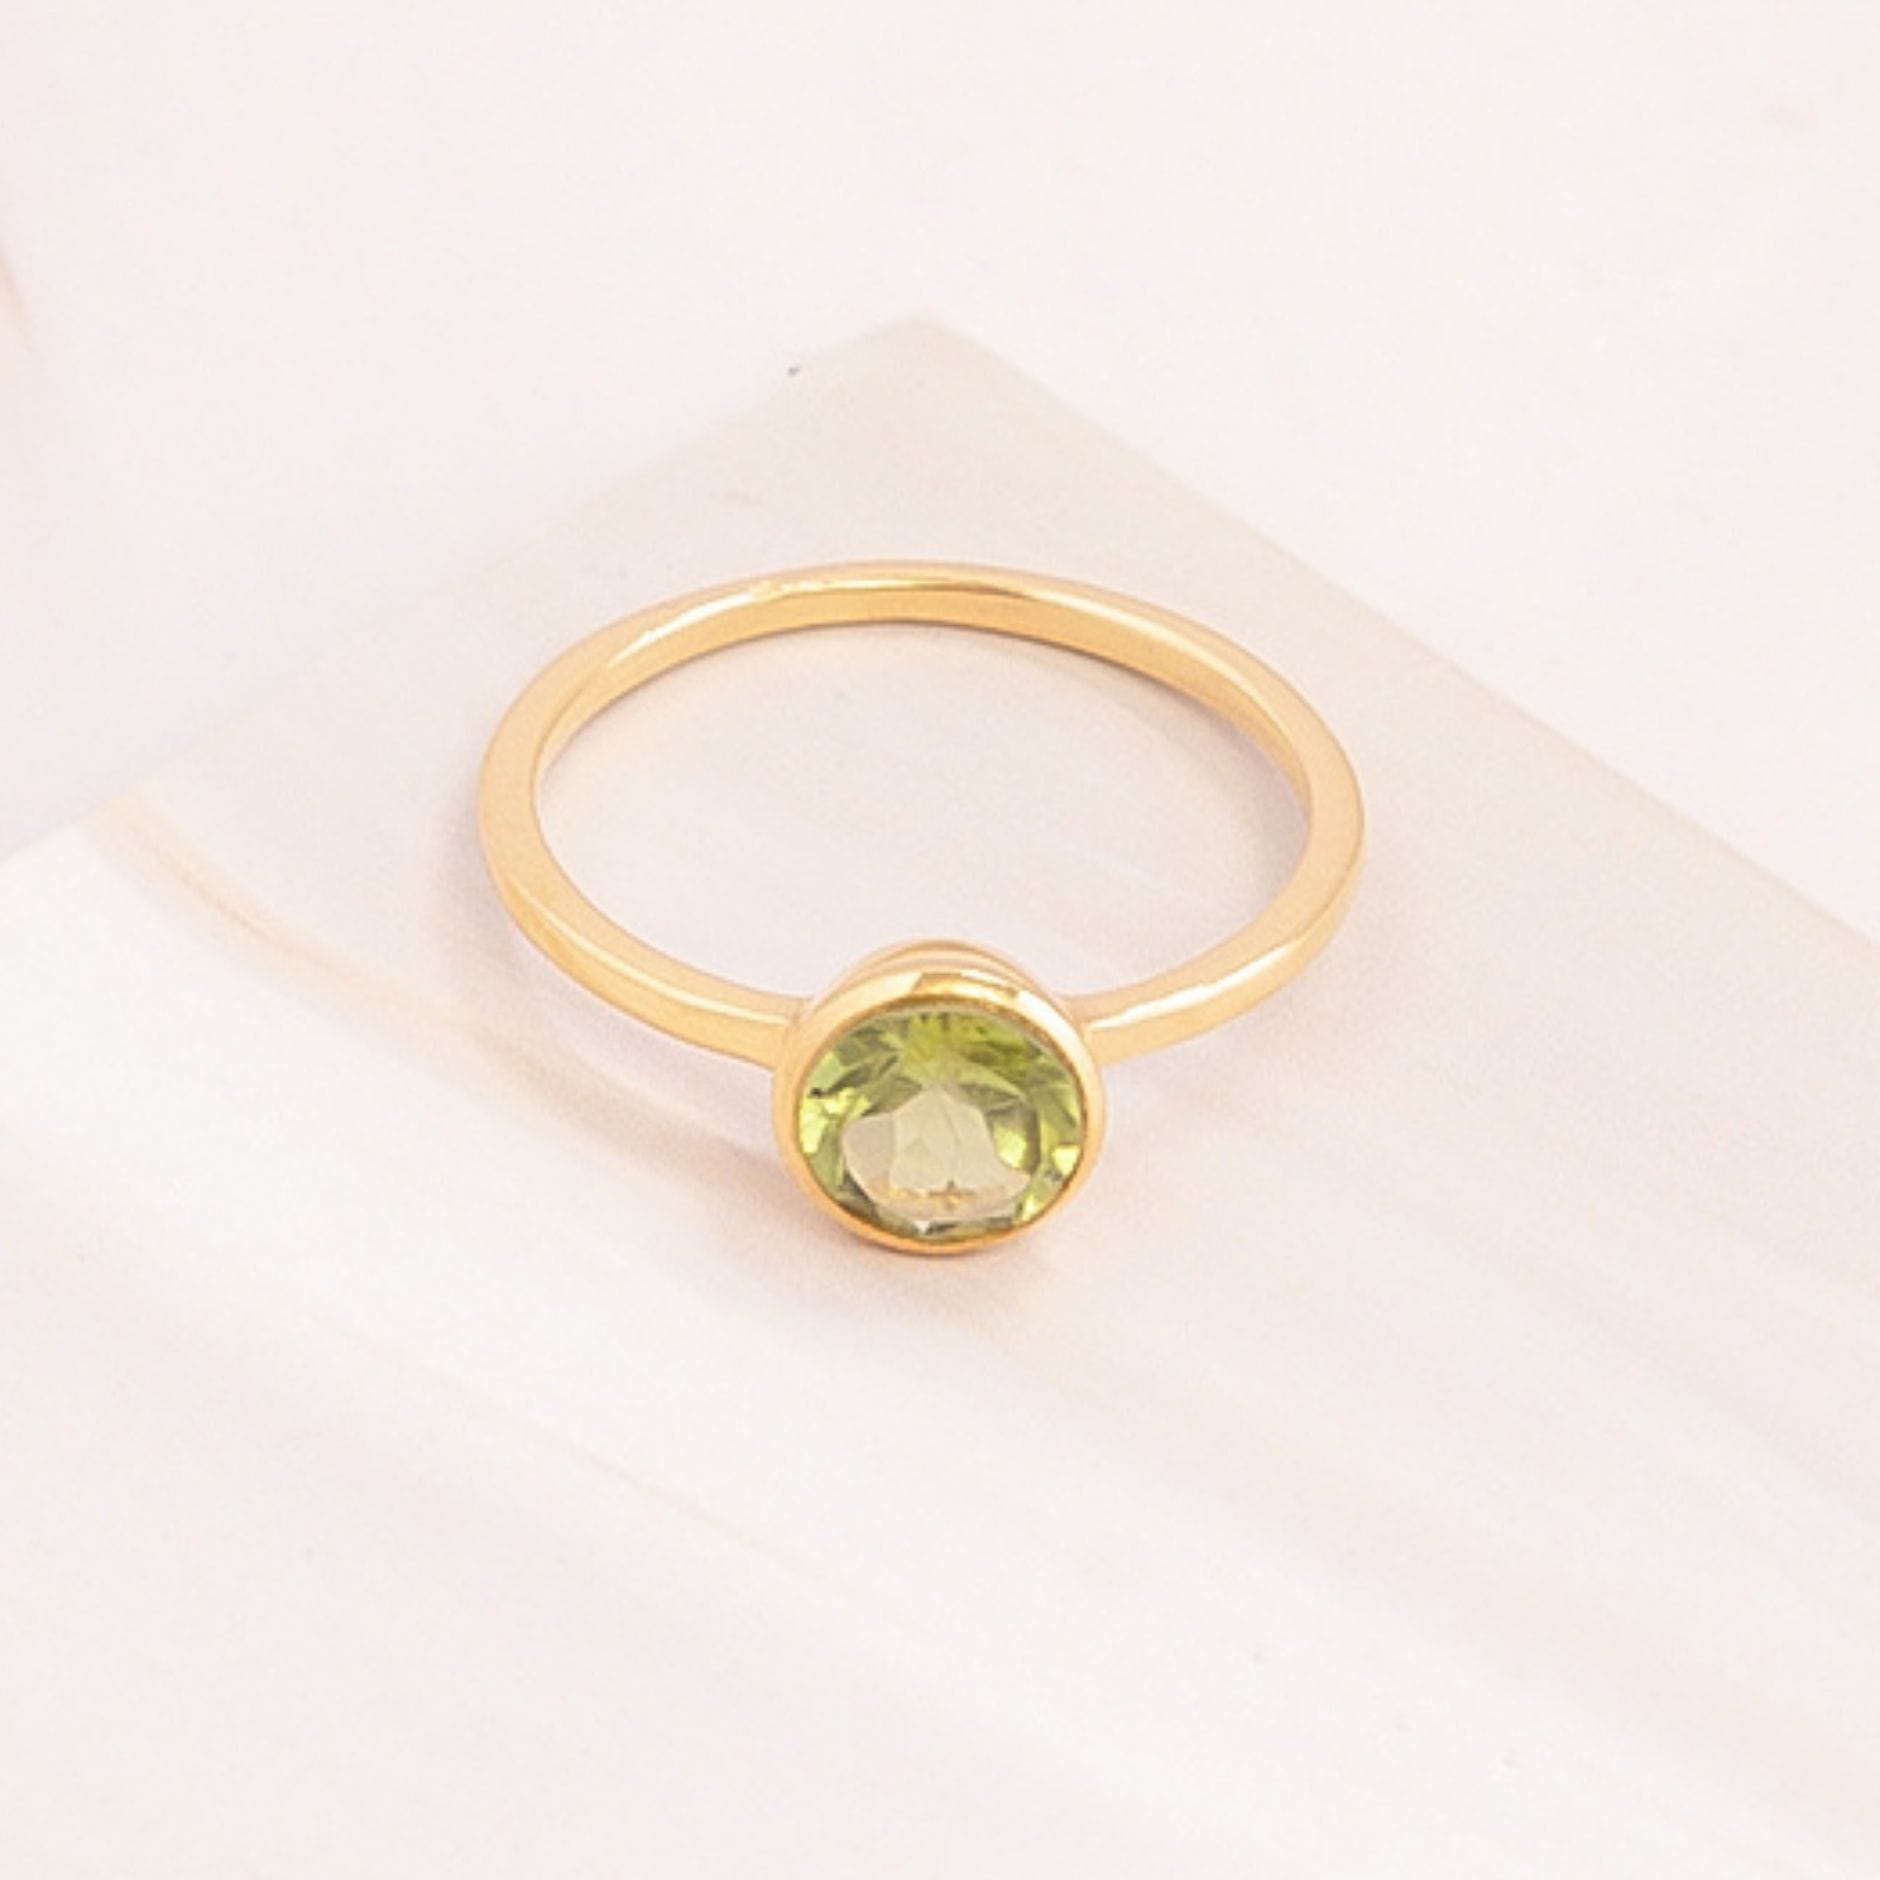 Emblem Jewelry Rings Green Peridot / Round Signature Candy Gemstone Stack Rings (Ring Size 4)